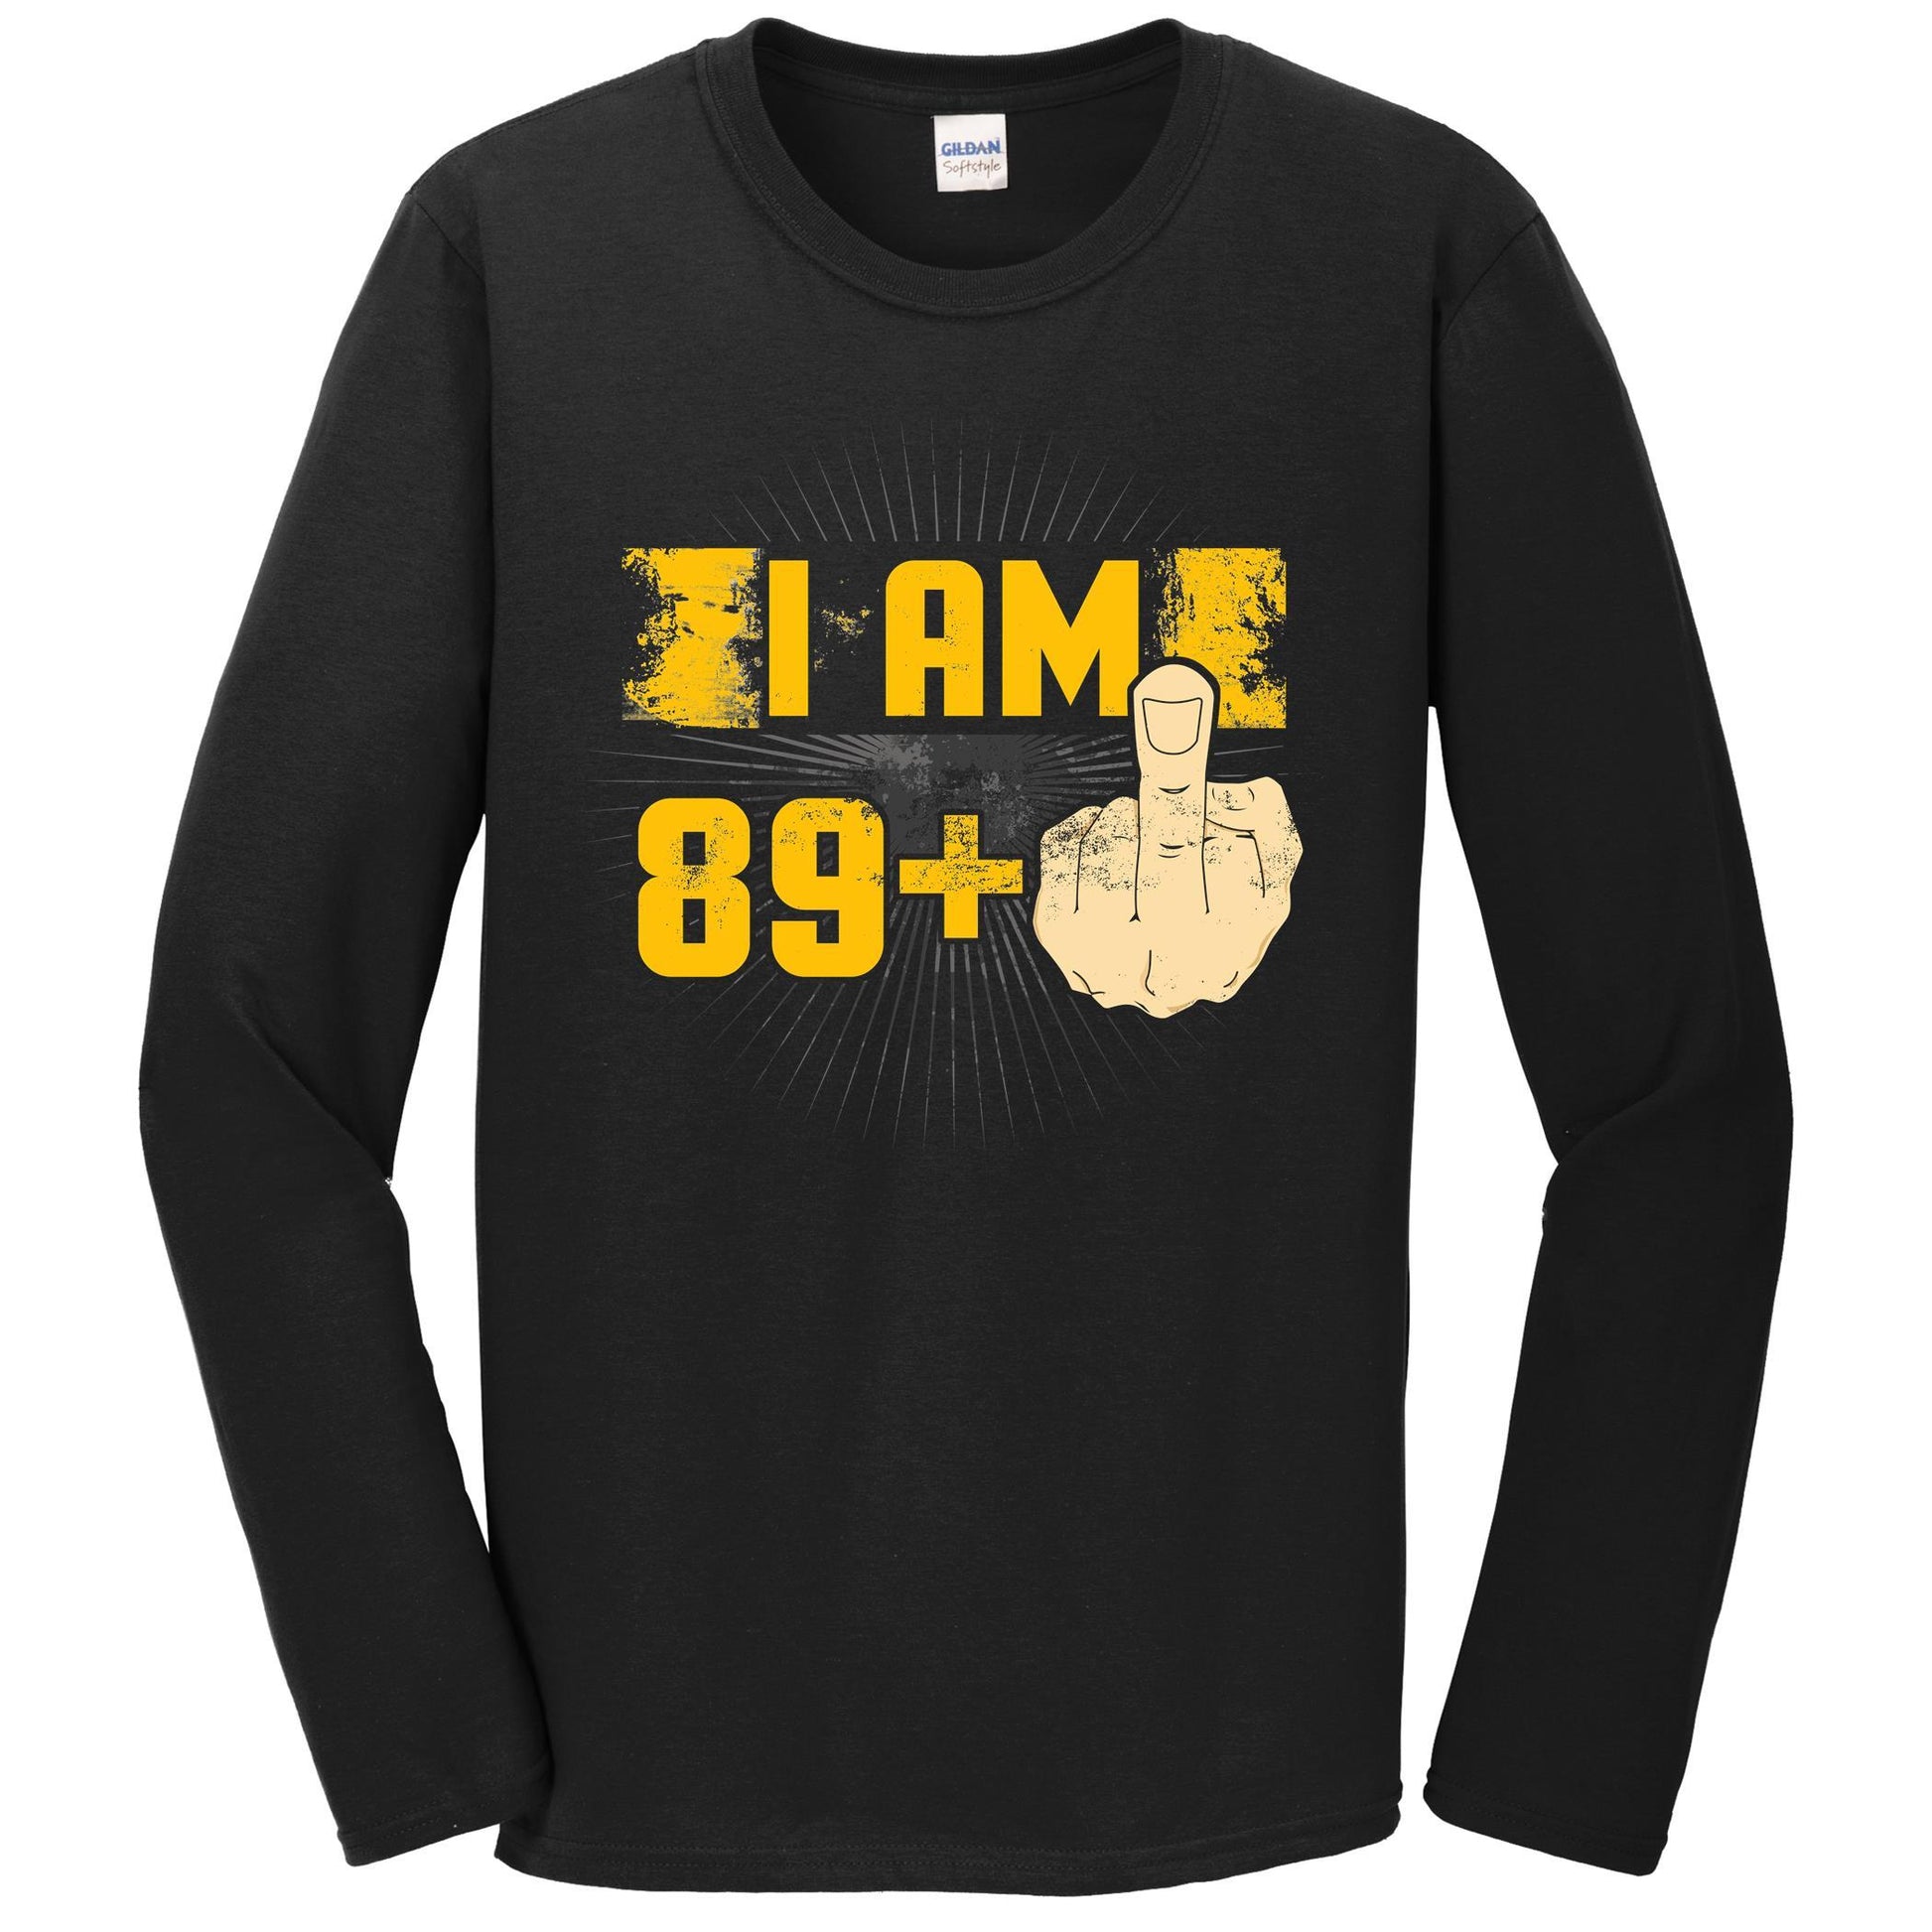 90th Birthday Shirt For Men - I Am 89 Plus Middle Finger 90 Years Old Long Sleeve T-Shirt